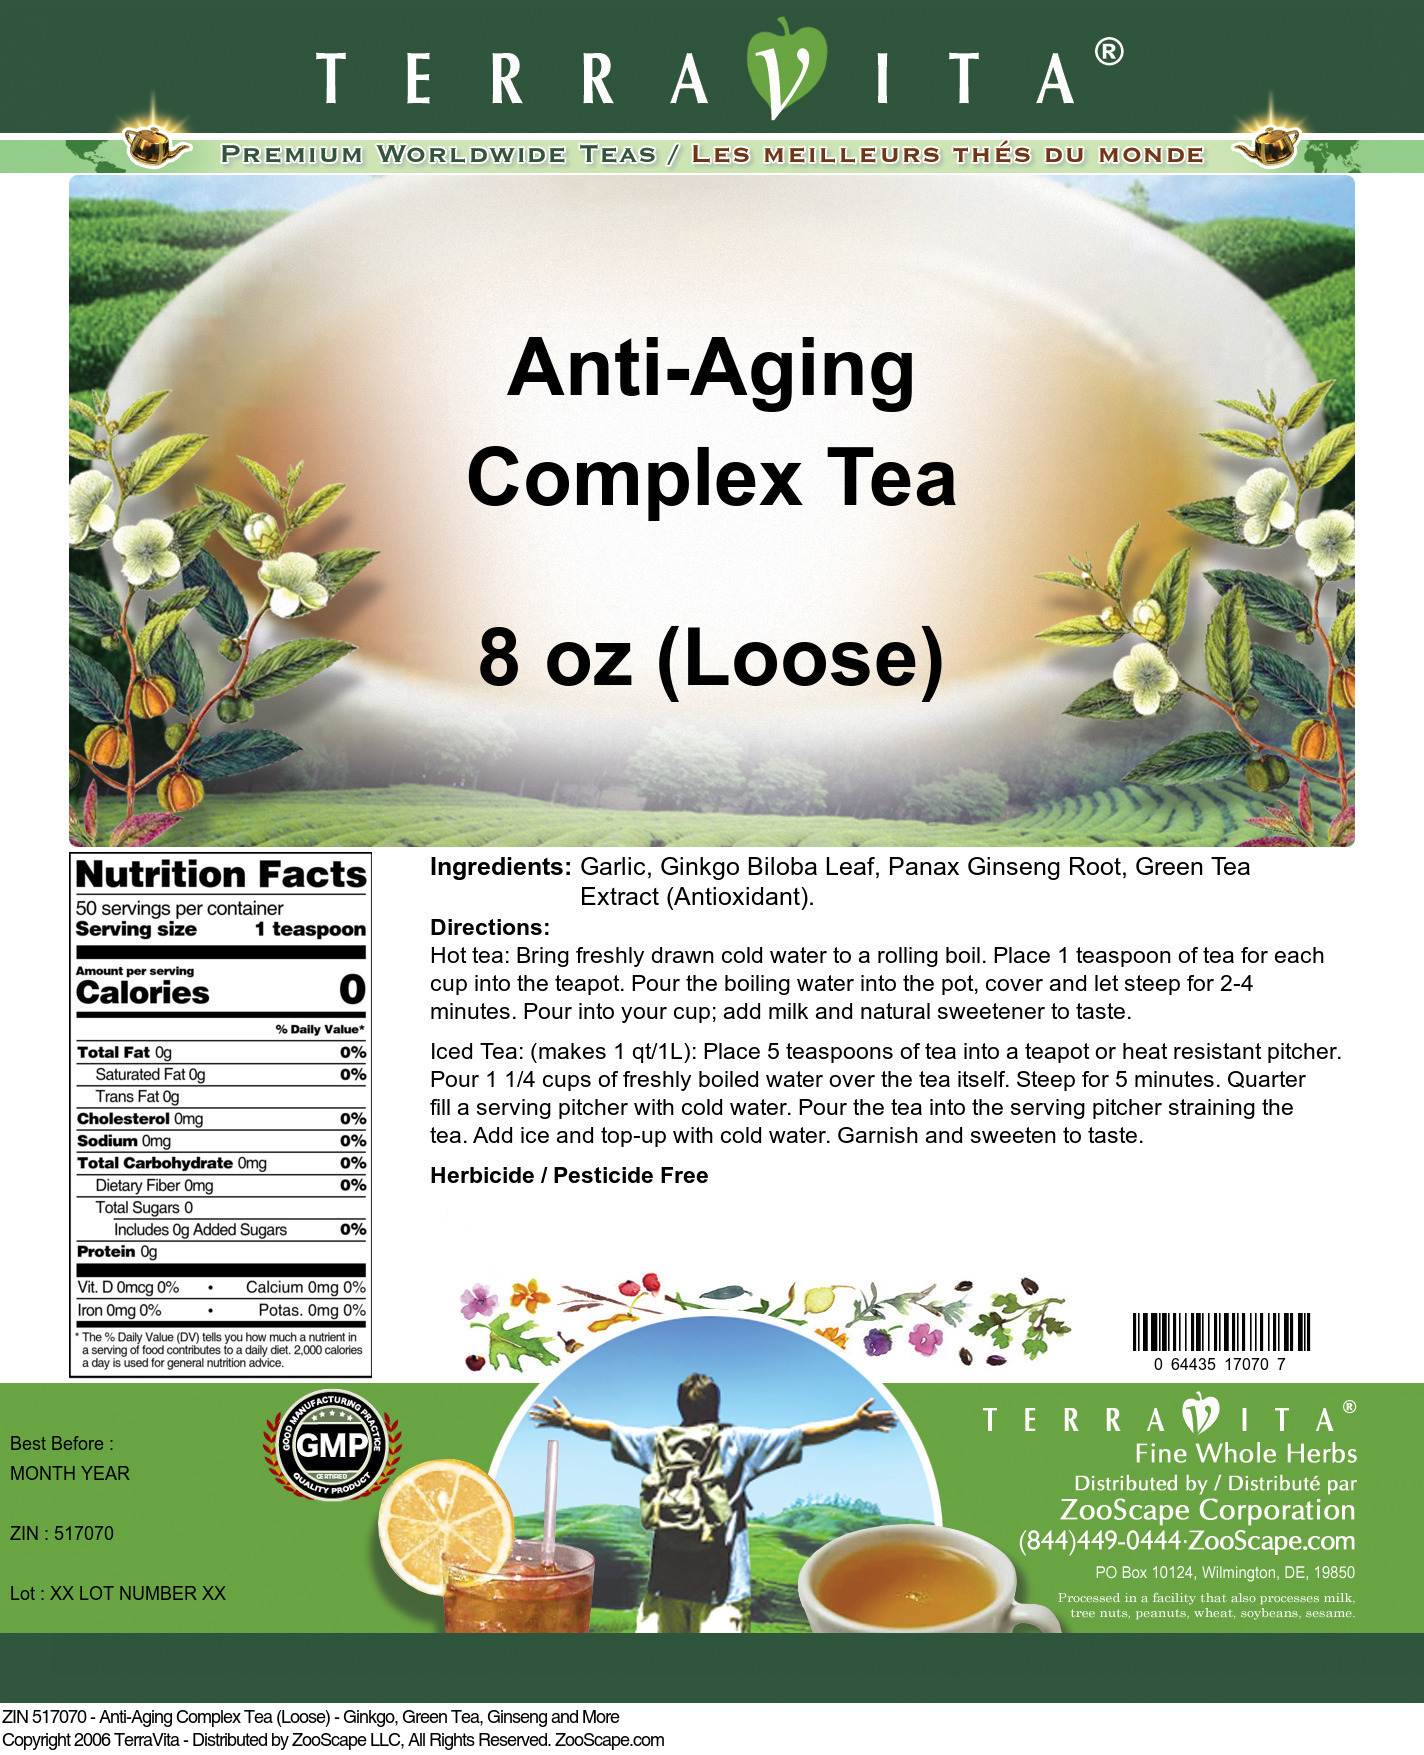 Anti-Aging Complex Tea (Loose) - Ginkgo, Green Tea, Ginseng and More - Label